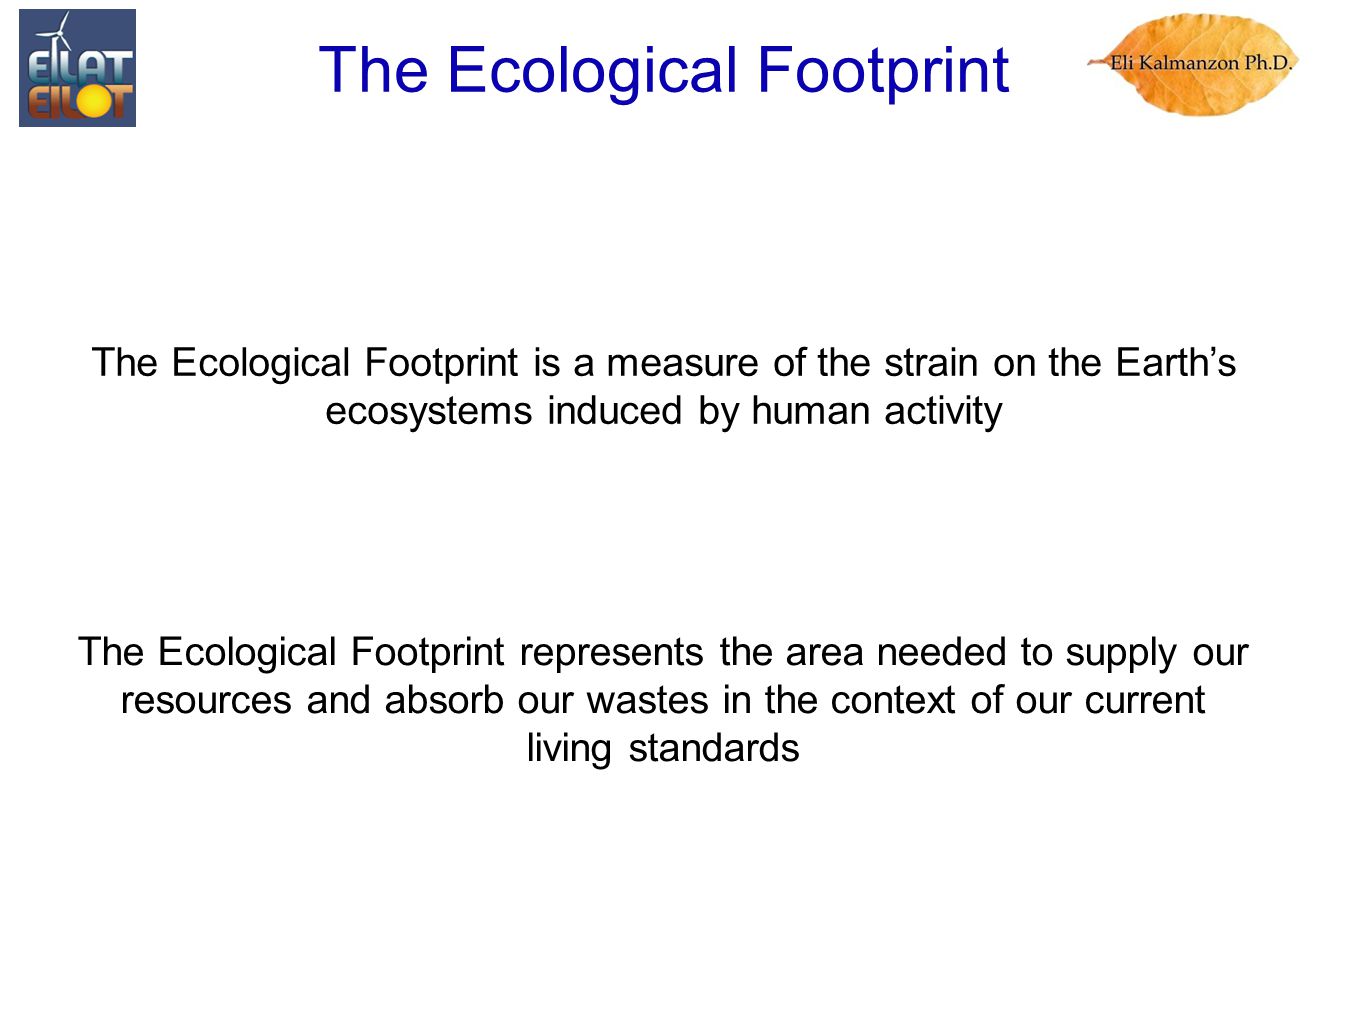 The Ecological Footprint The Ecological Footprint is a measure of the strain on the Earth’s ecosystems induced by human activity The Ecological Footprint represents the area needed to supply our resources and absorb our wastes in the context of our current living standards